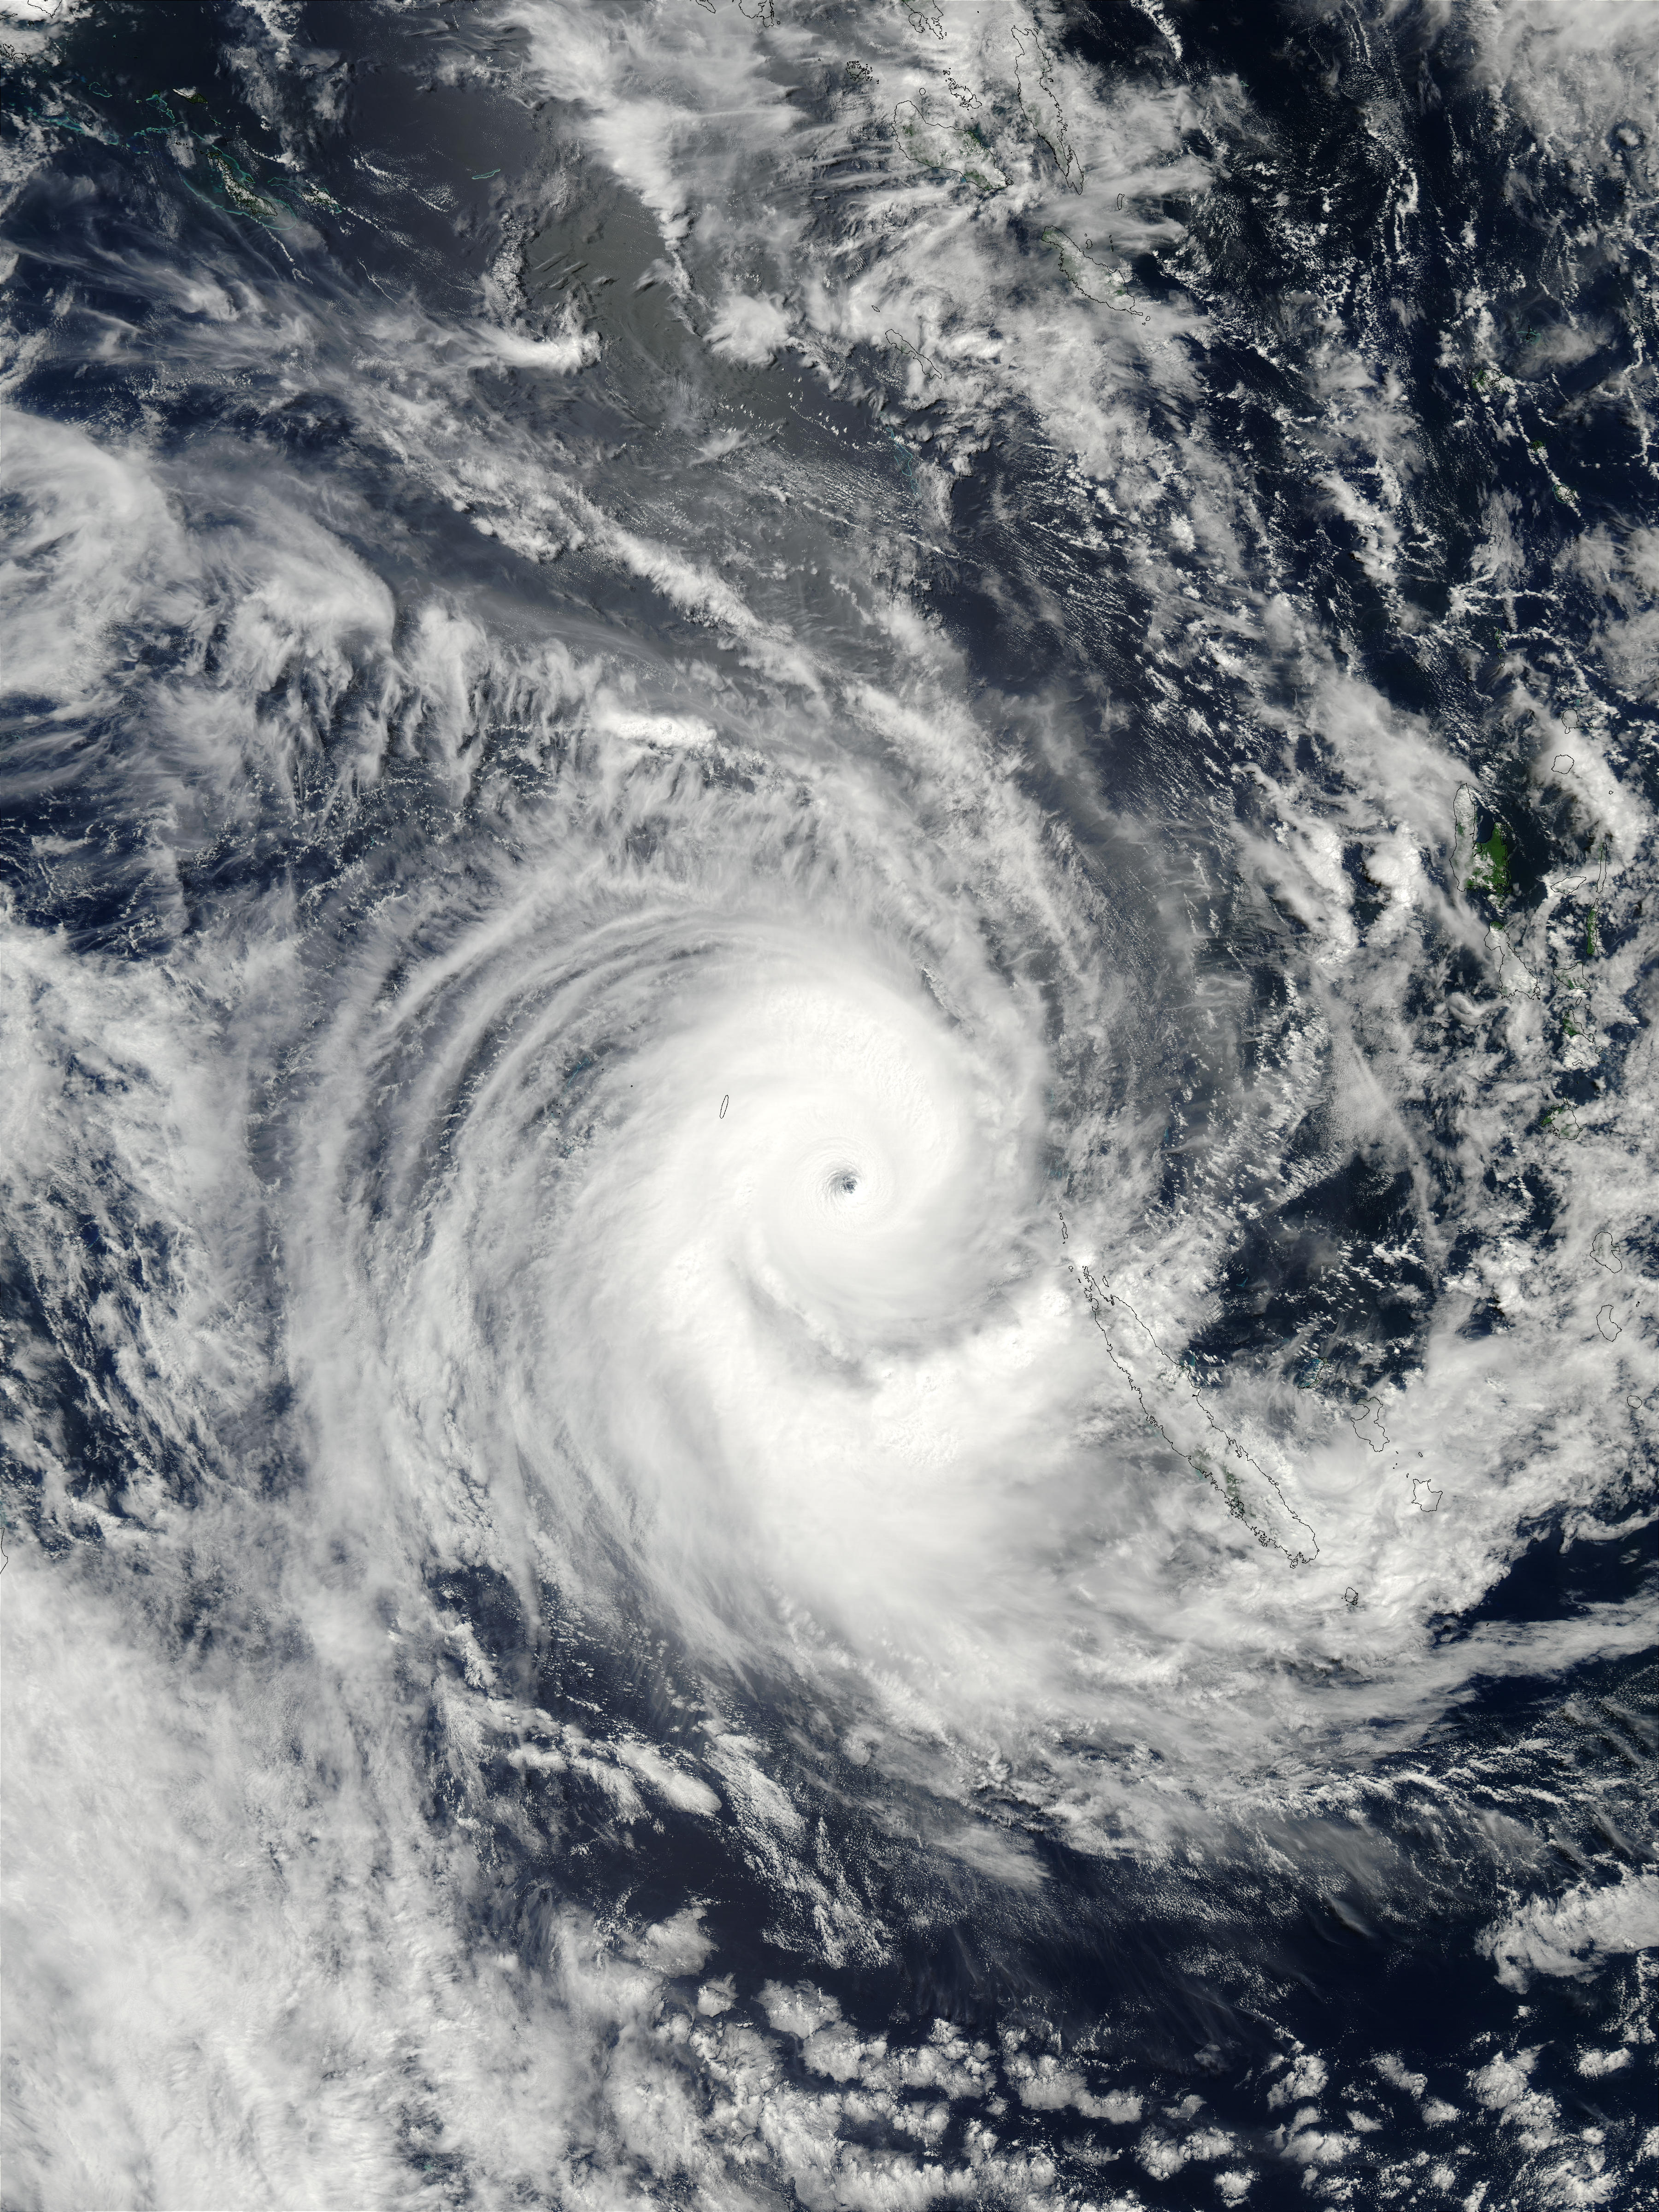 Tropical Cyclone Erica (22P) off New Caledonia, South Pacific Ocean - related image preview